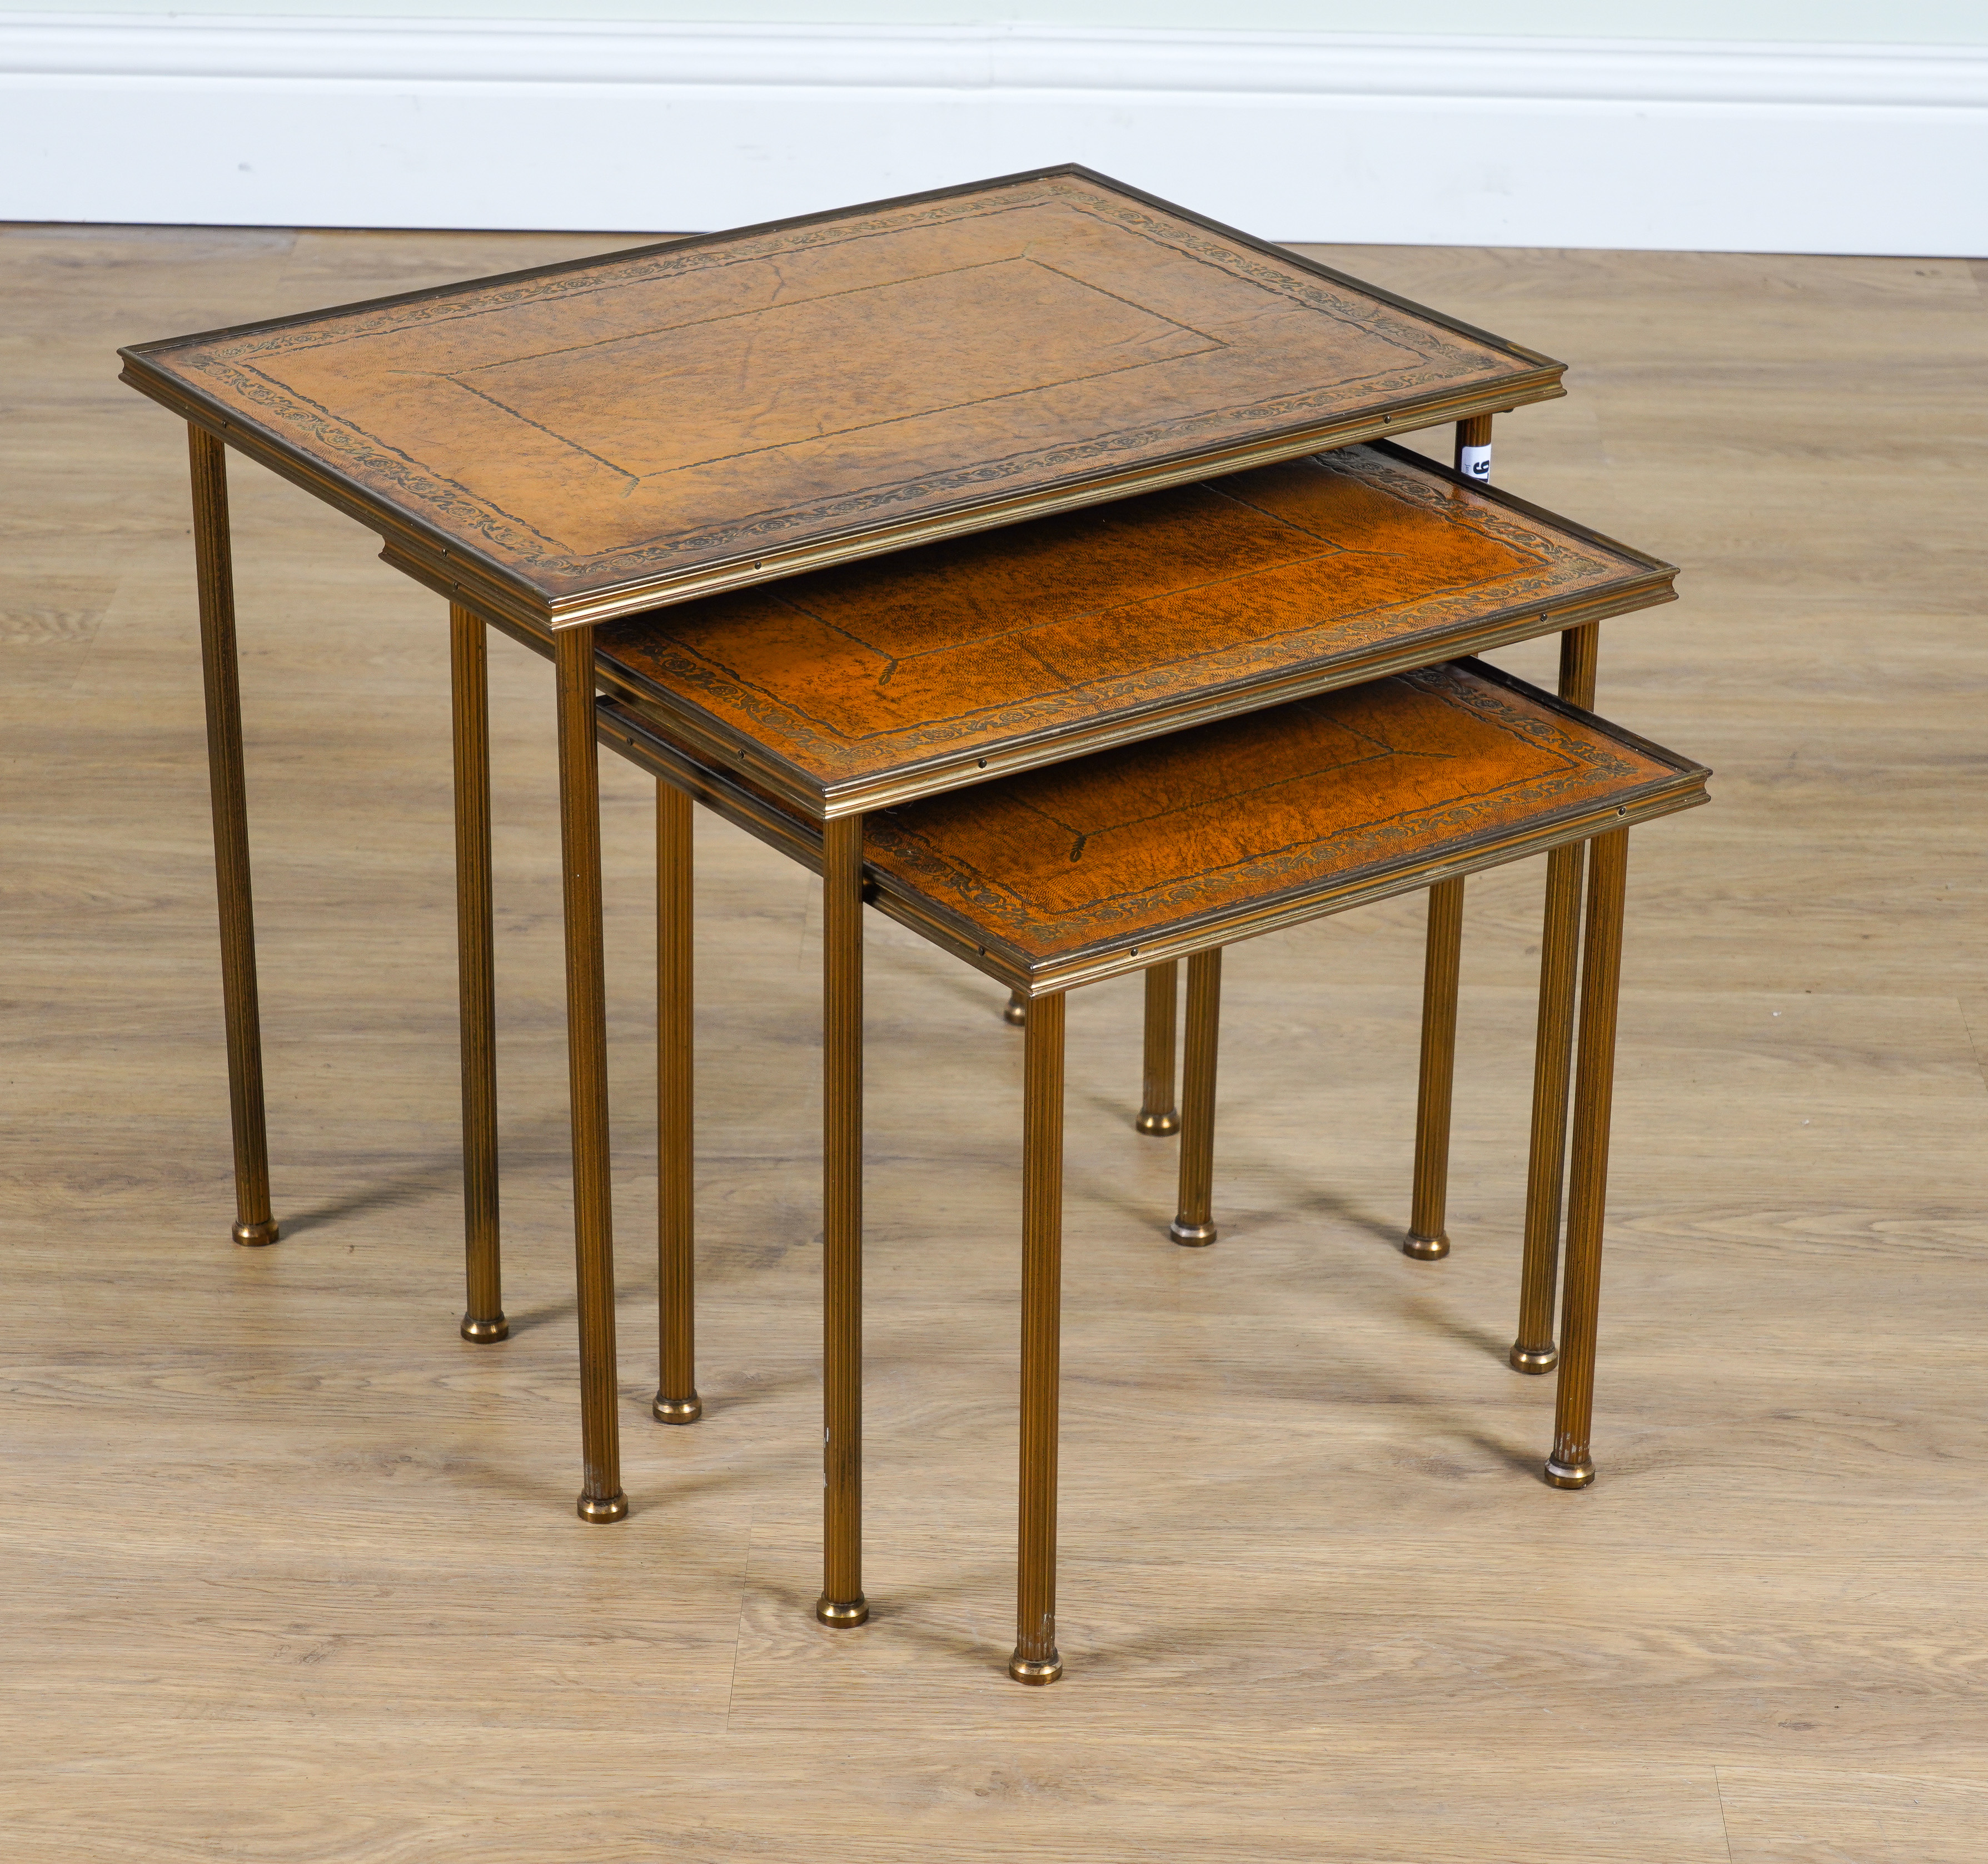 A NEST OF THREE MID-20TH CENTURY LEATHER INSET LACQUERED BRASS OCCASIONAL TABLES (3)